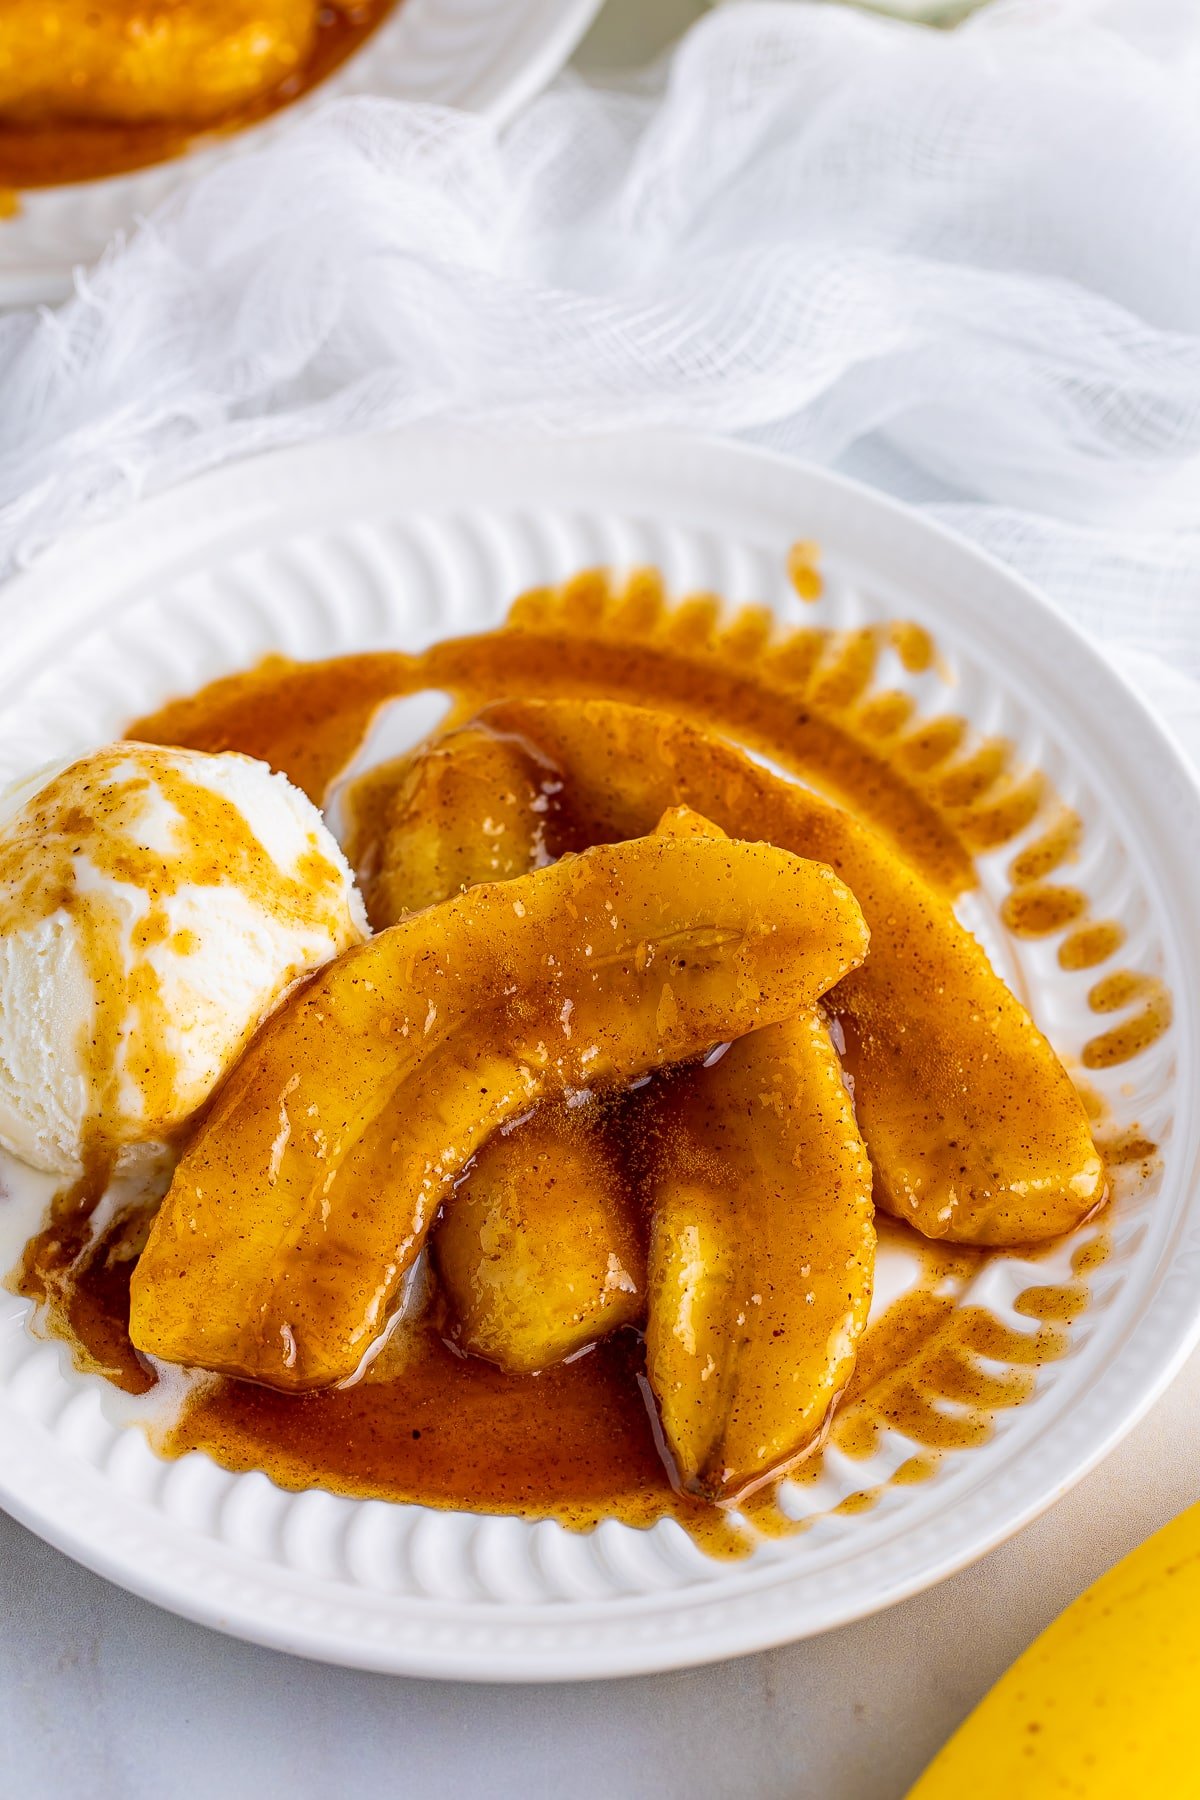 Overhead upclose angle of New Orleans Bananas Foster with scoop of vanilla ice cream, on a white plate. White gauze linen in the background and banana.